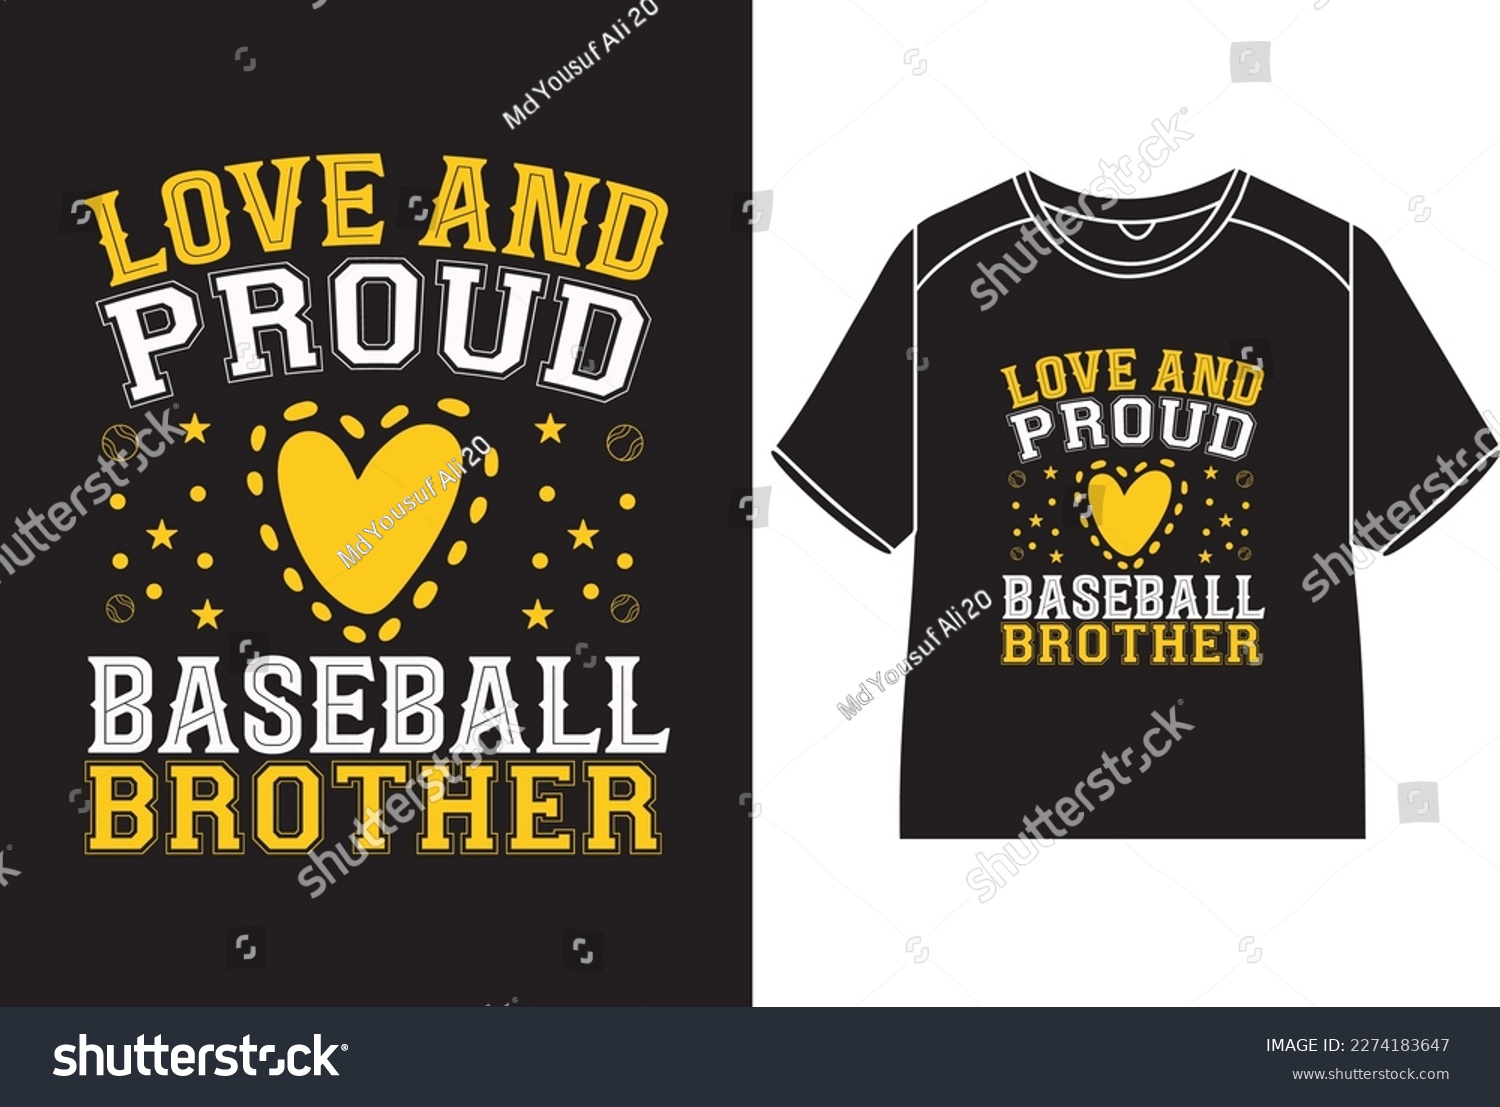 SVG of Love and proud baseball brother T-Shirt Design svg